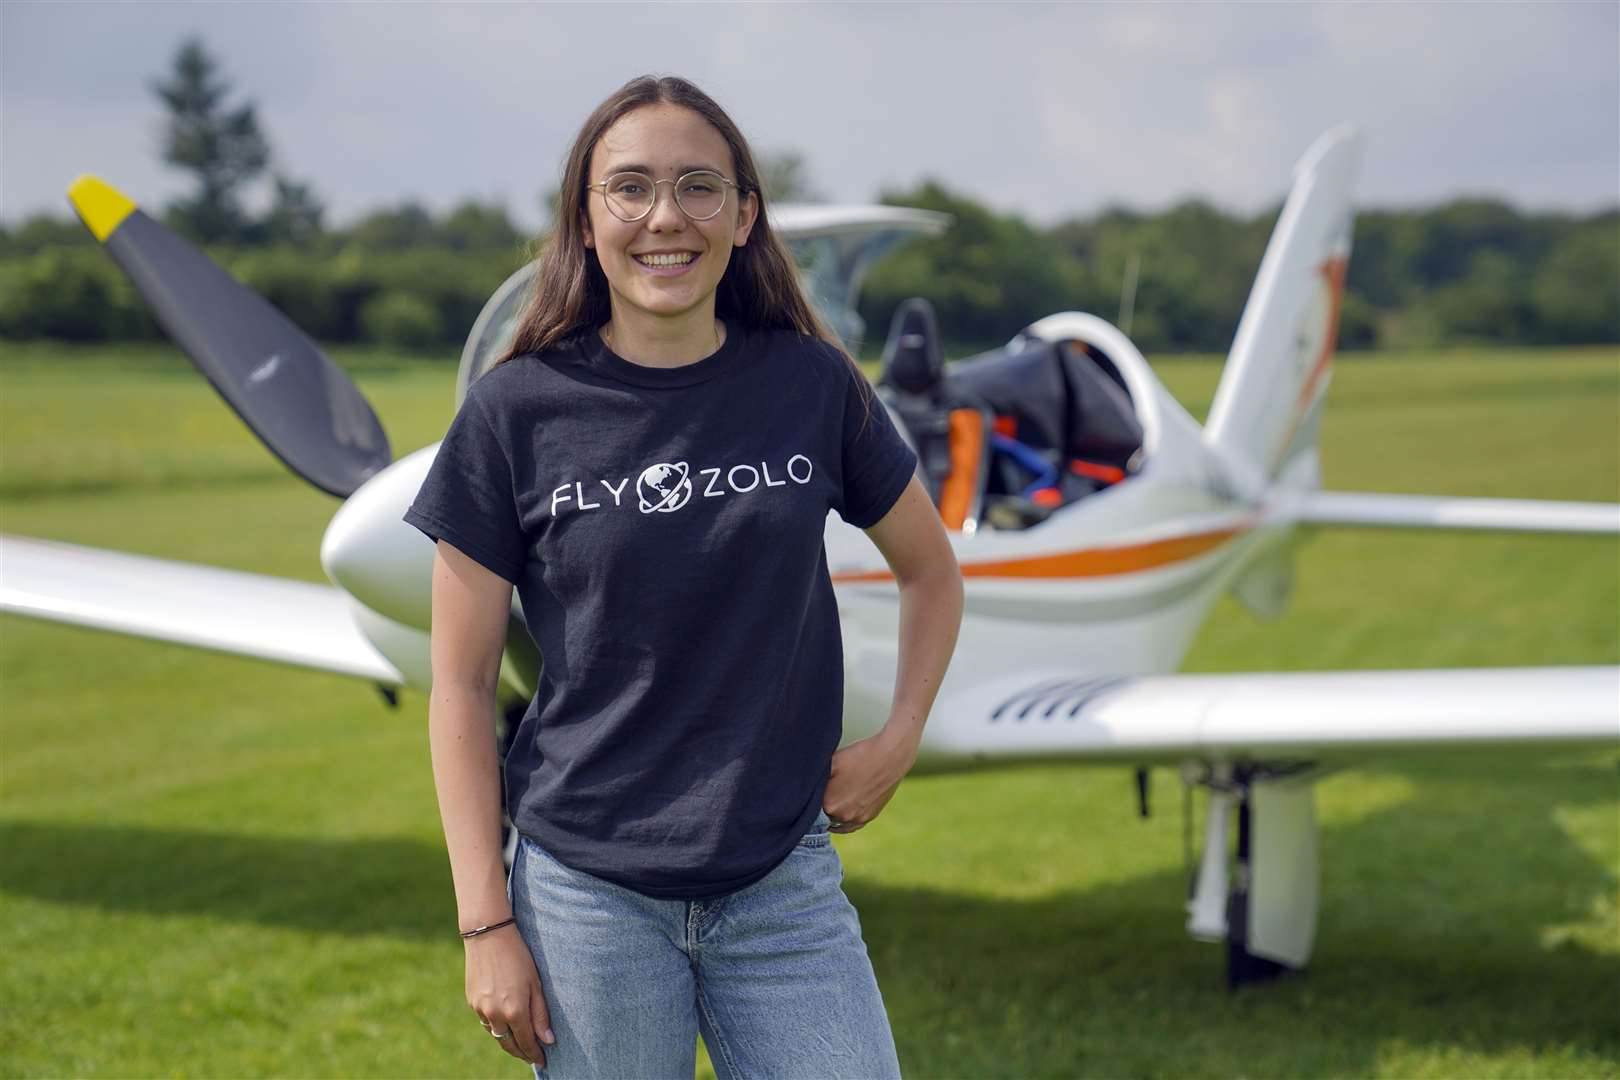 Zara Rutherford said she hopes to get more girls interested in aviation (Steve Parsons/PA)